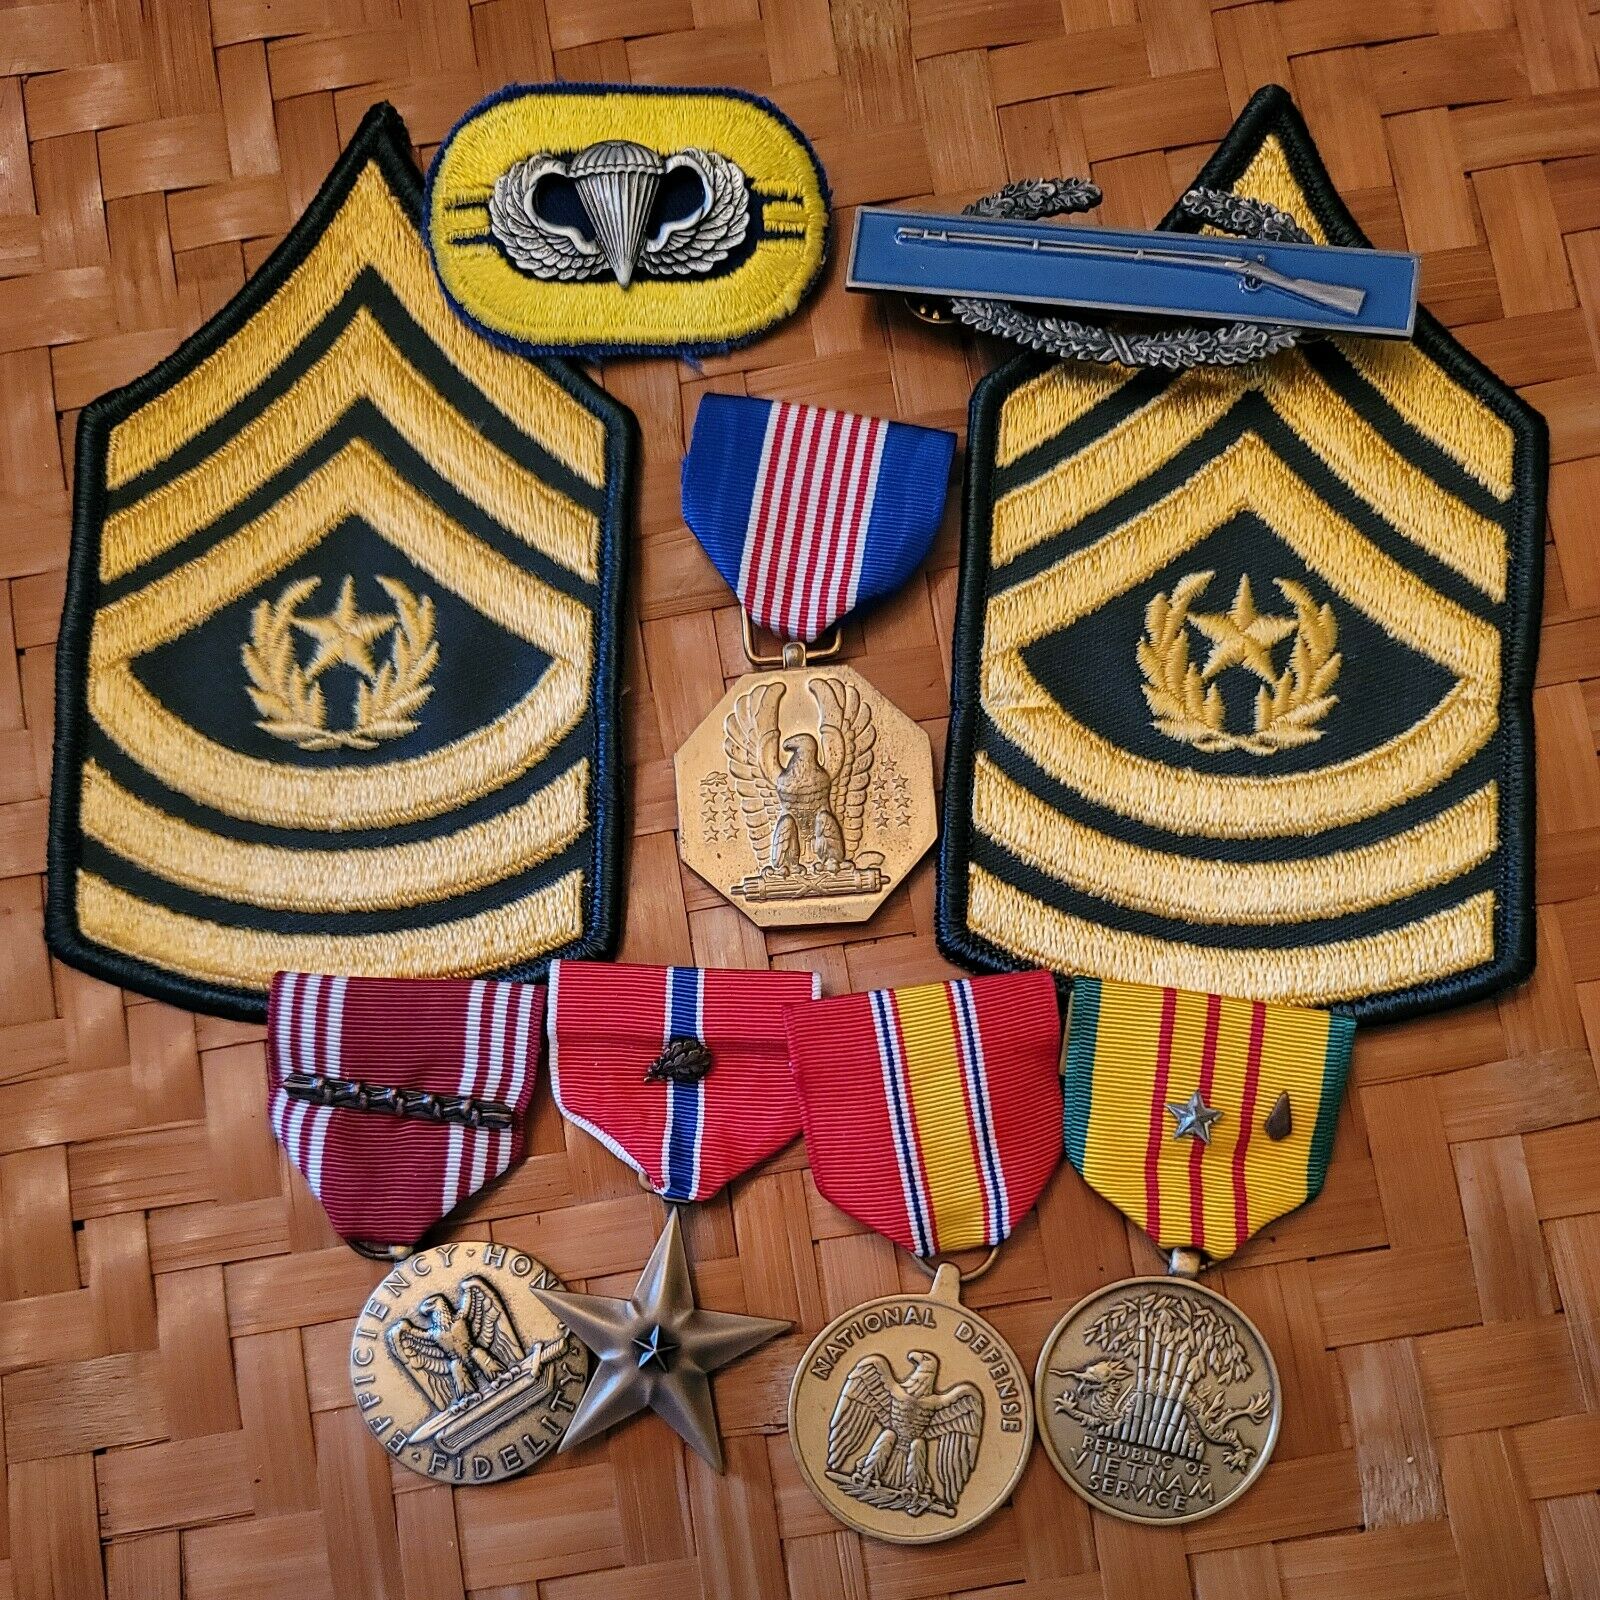 Us Army  2nd Battalion, 504th Infantry Regimen Jump Wings-cib - 5 Medals Patches